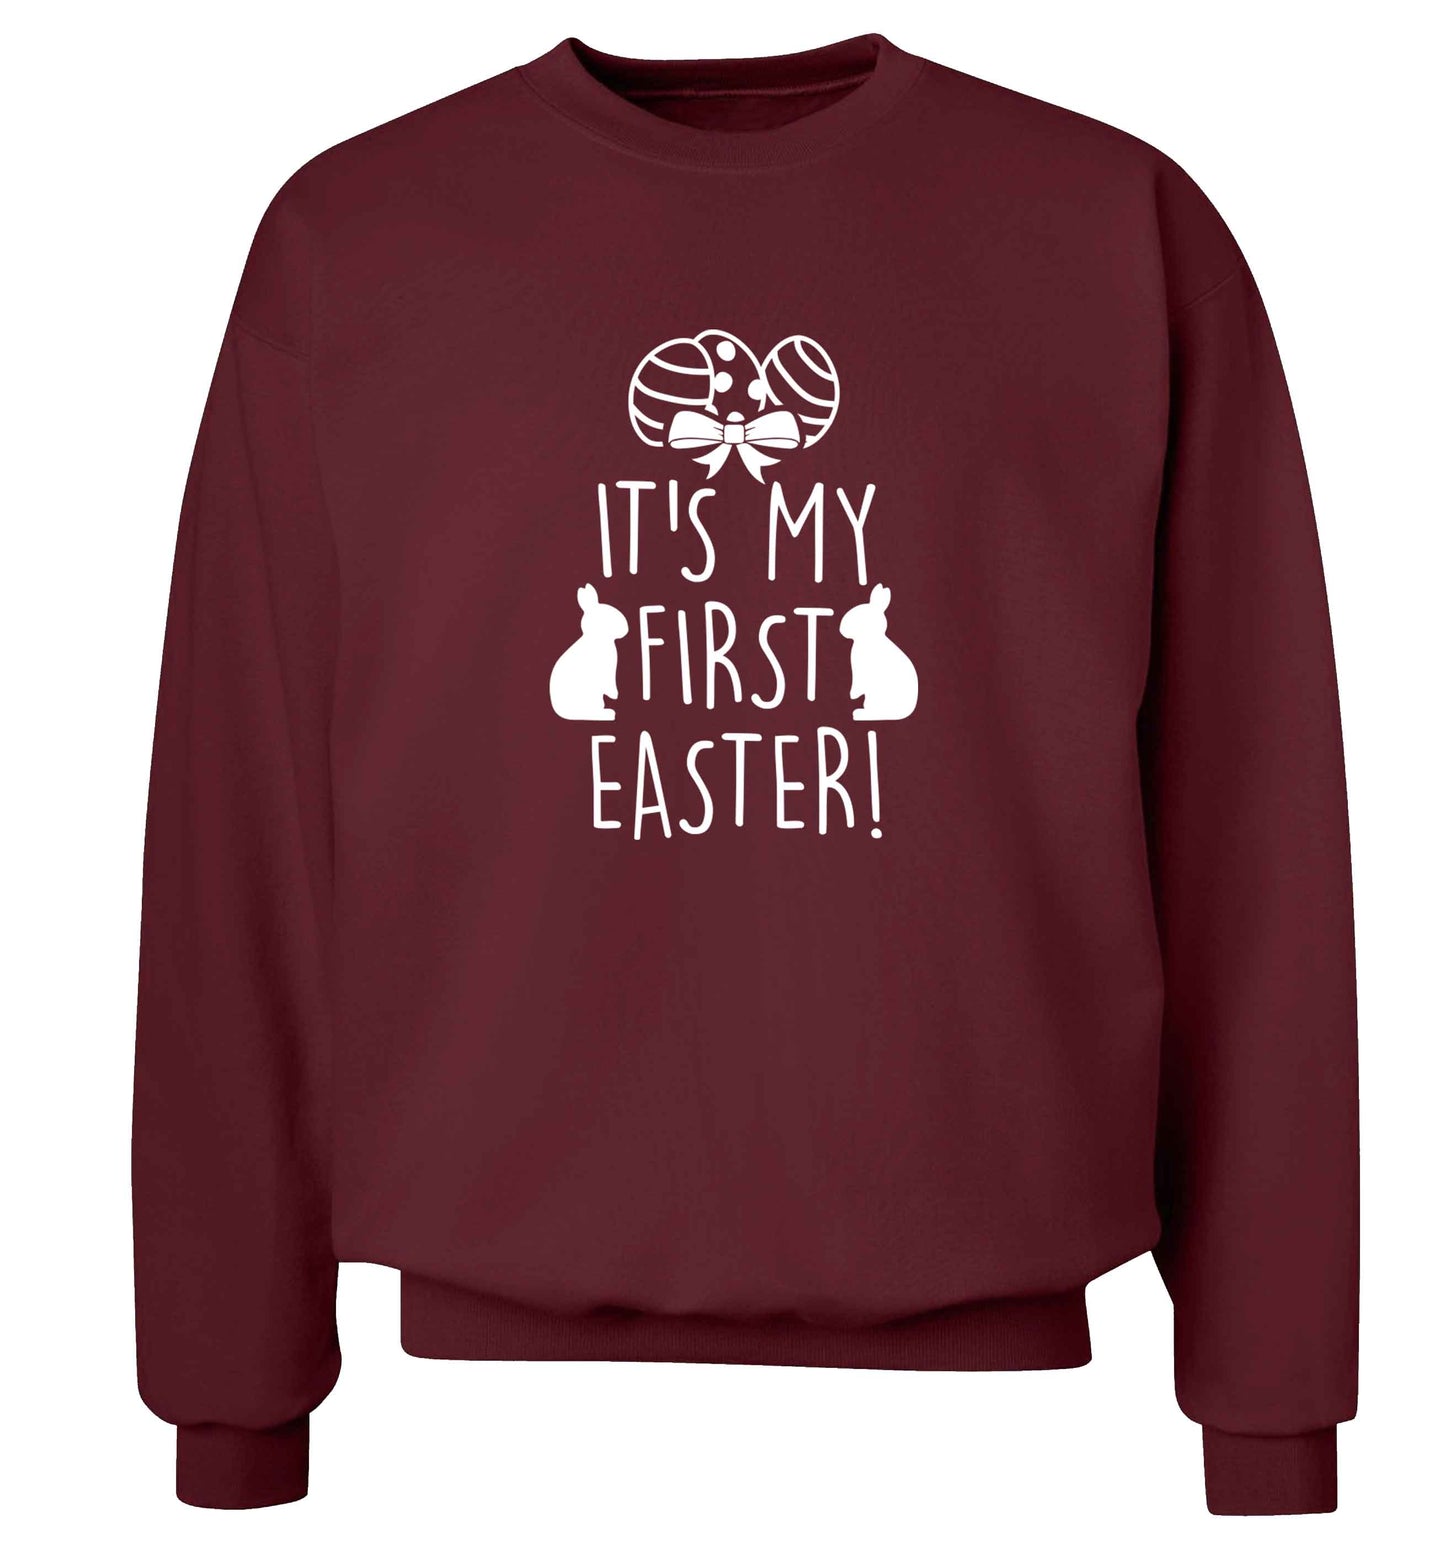 It's my first Easter adult's unisex maroon sweater 2XL